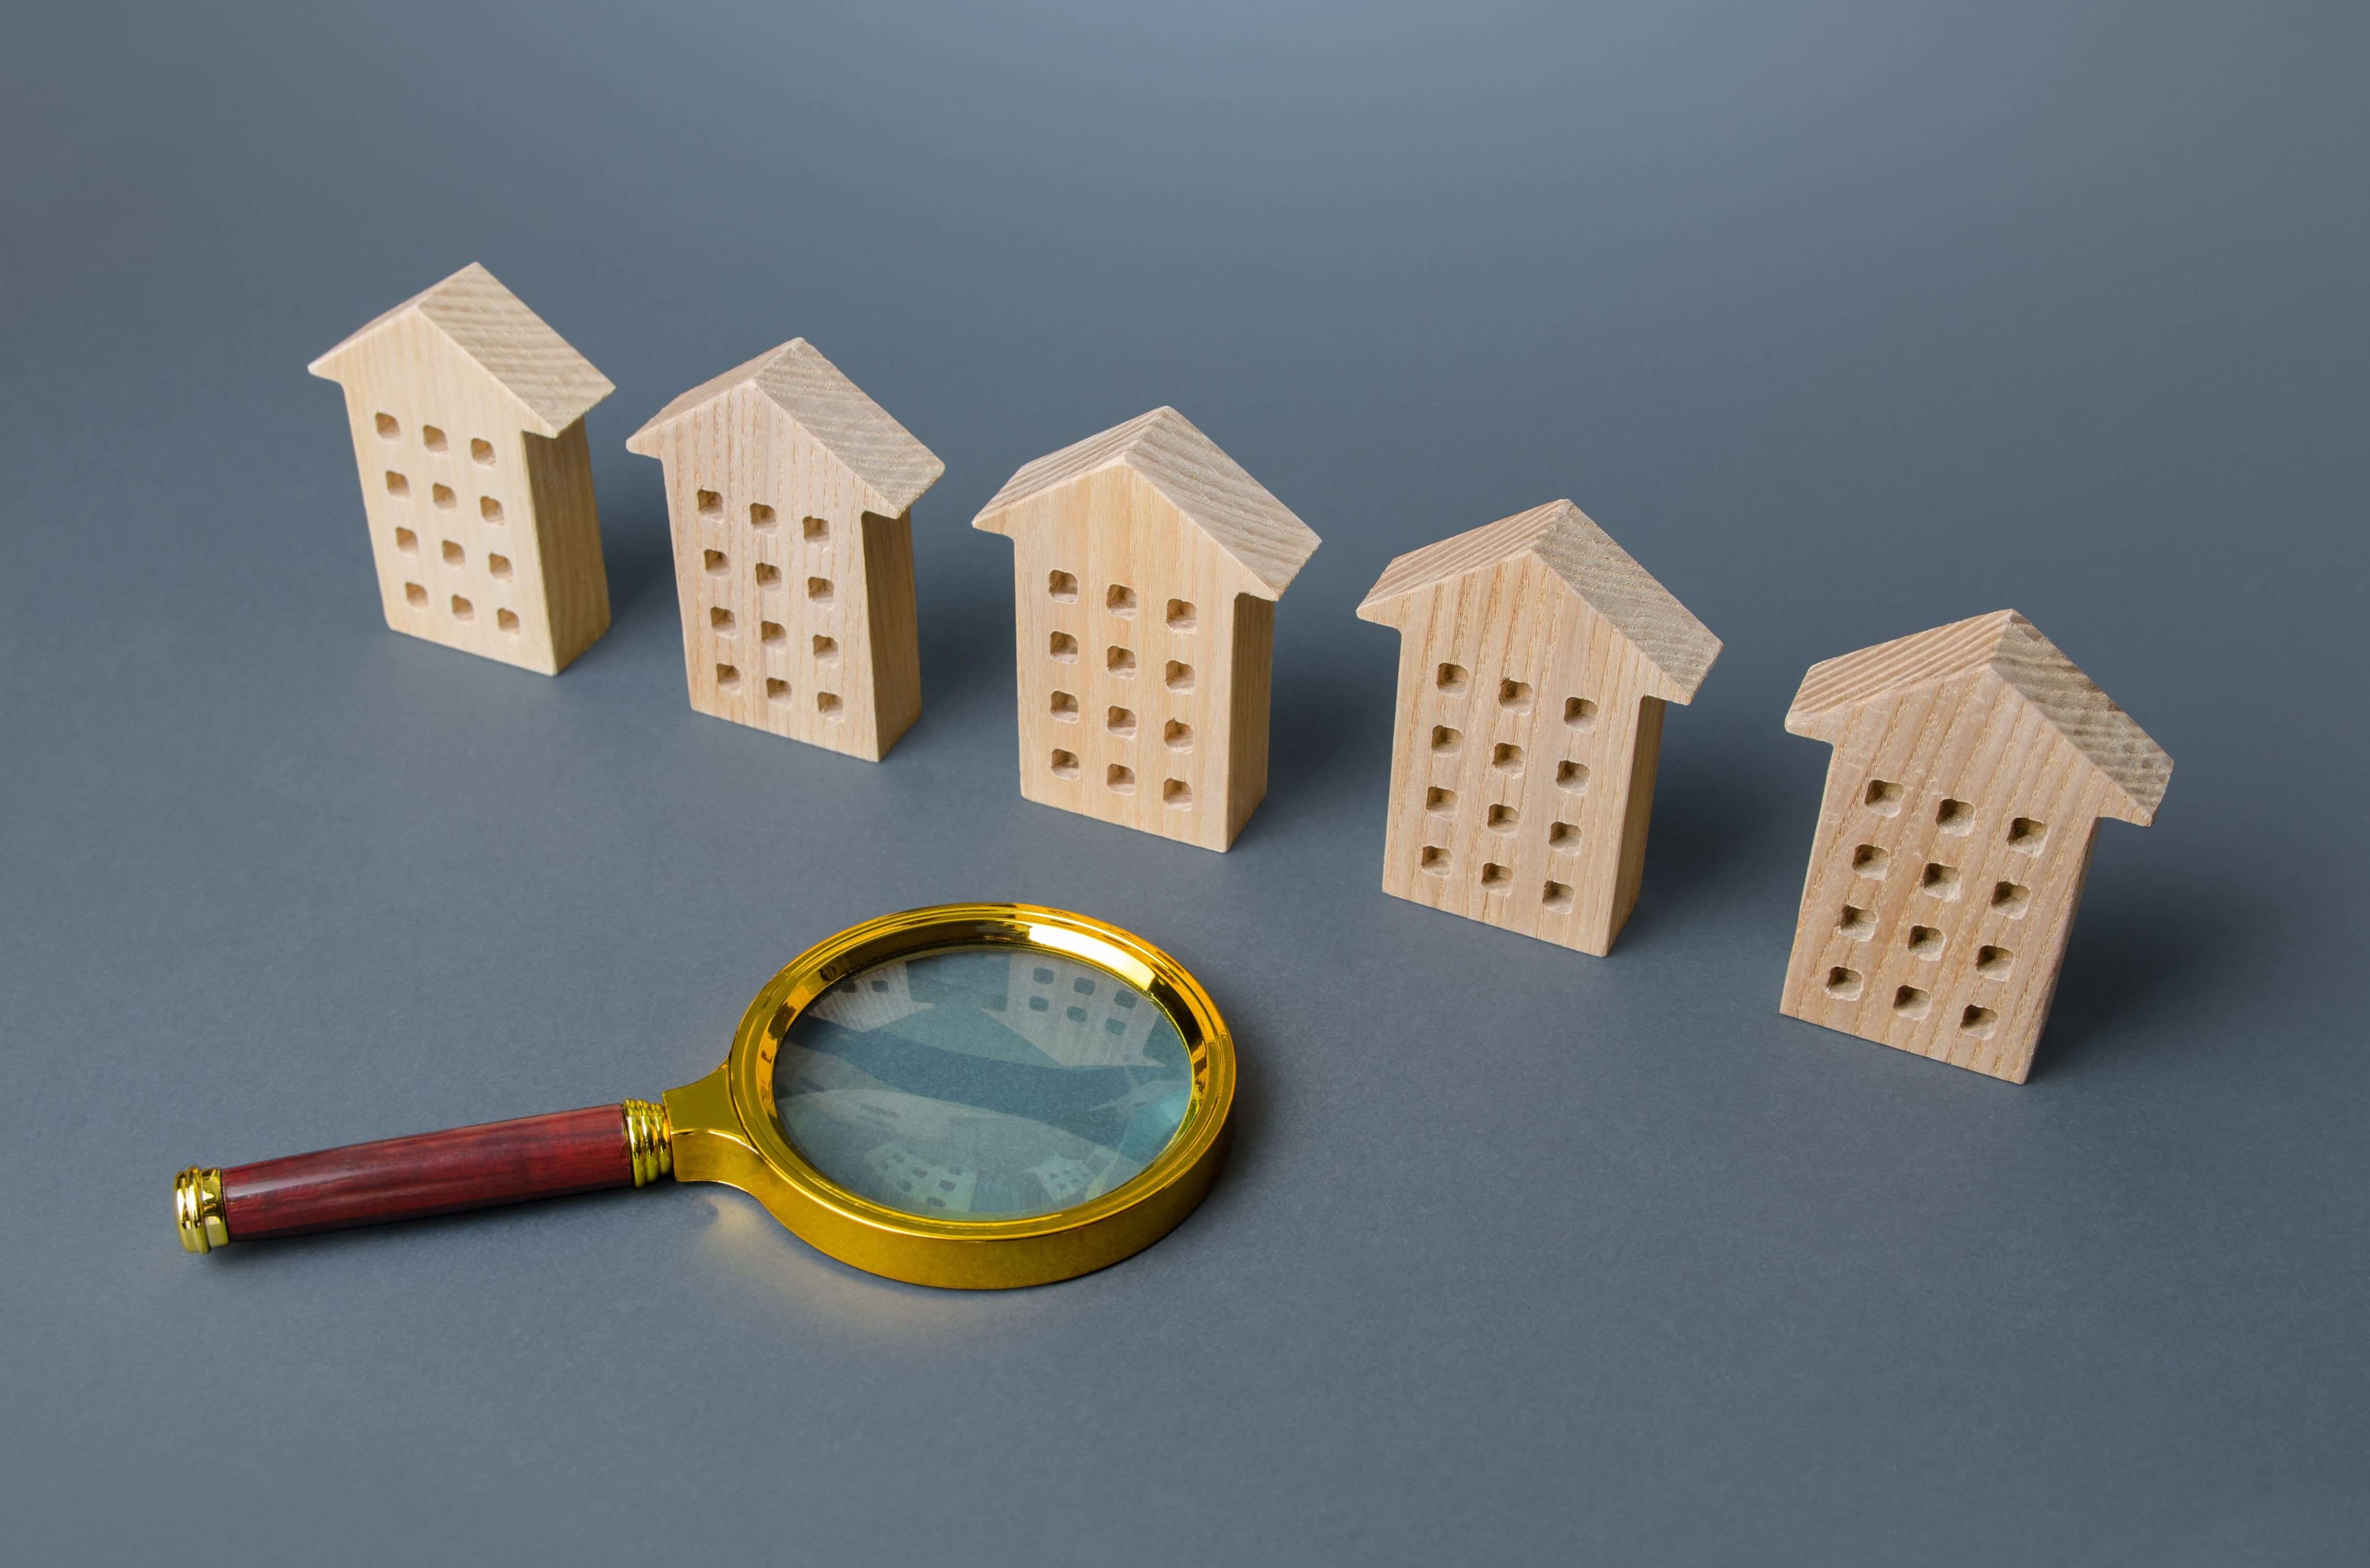 wooden houses next to magnifying glass